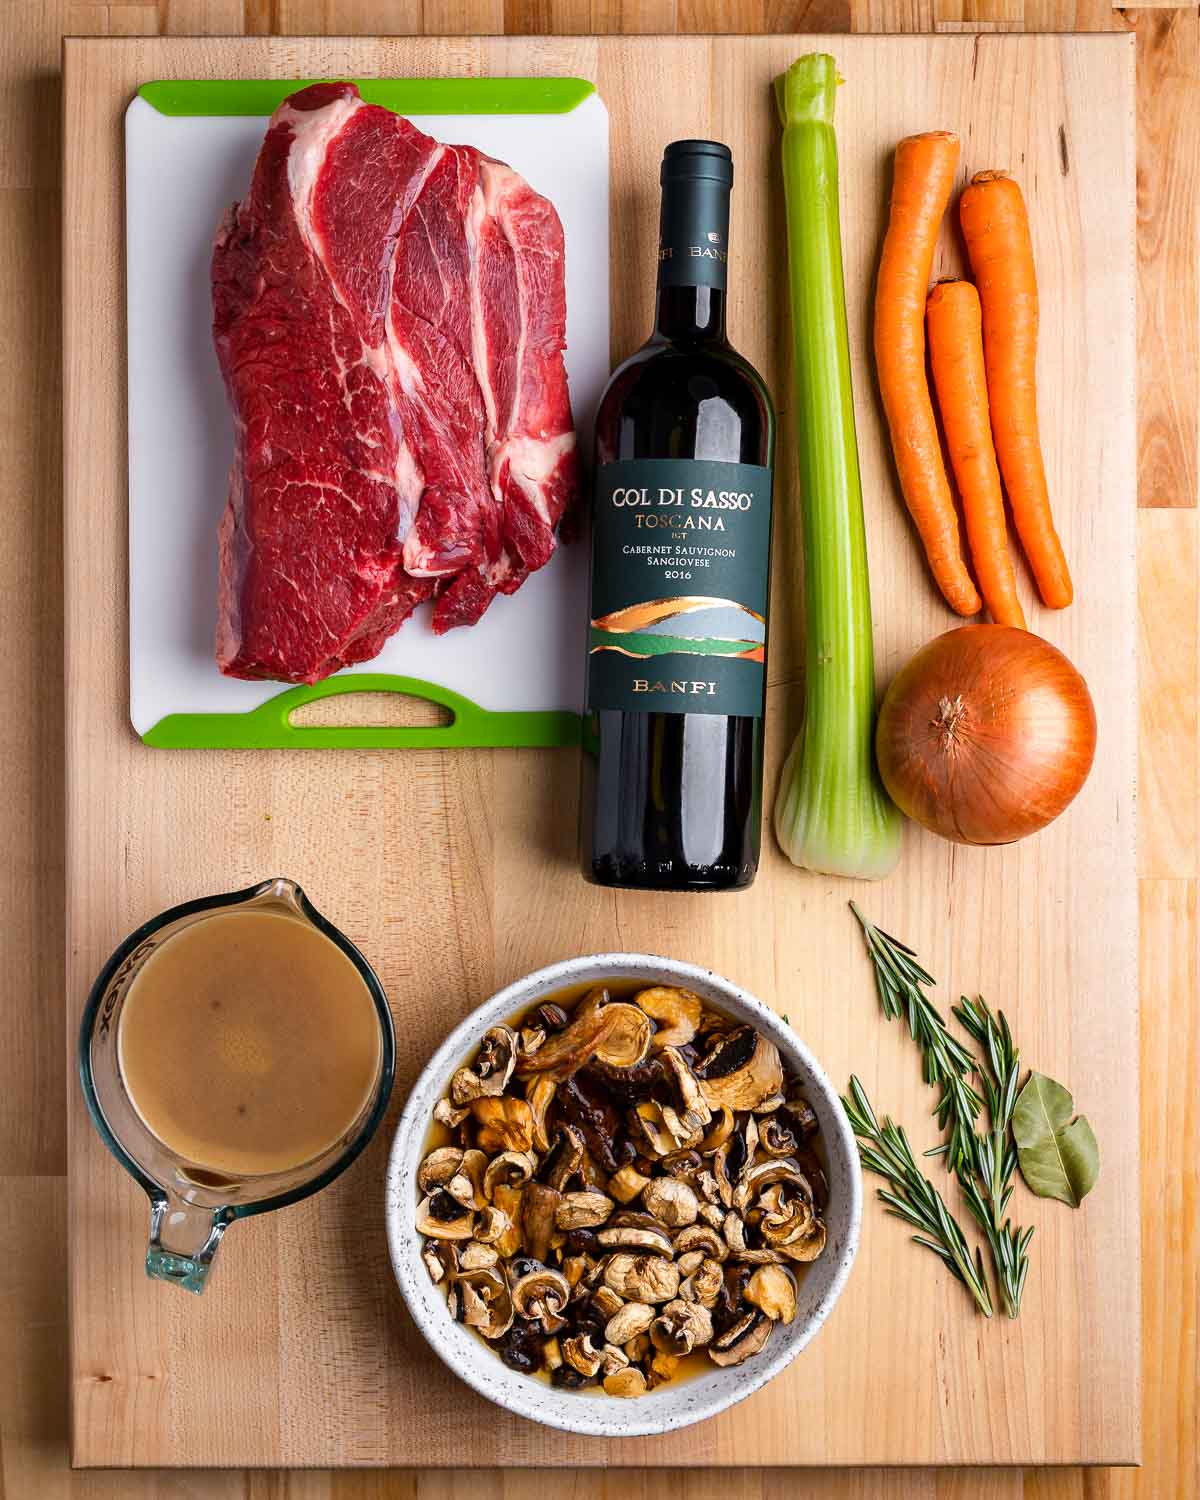 Ingredients shown: beef chuck, wine, celery, carrots, onion, beef stock, mushrooms, and herbs.